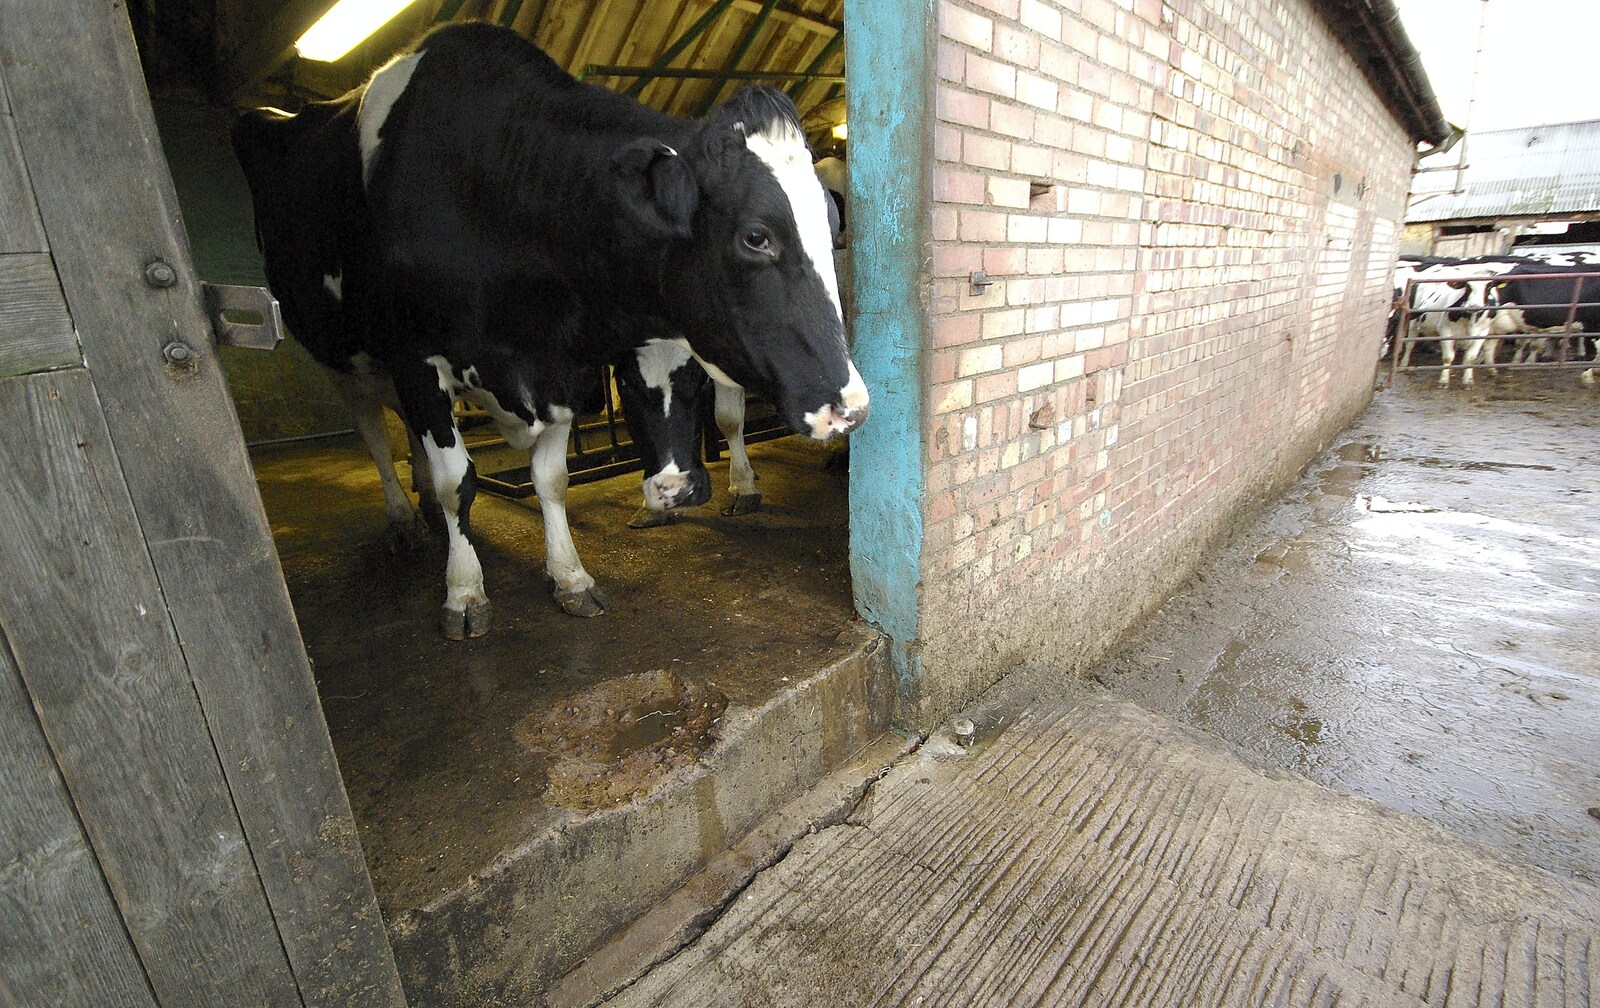 A cow exits the dairy from The Last Milking at Dairy Farm, Thrandeston, Suffolk - 11th January 2007